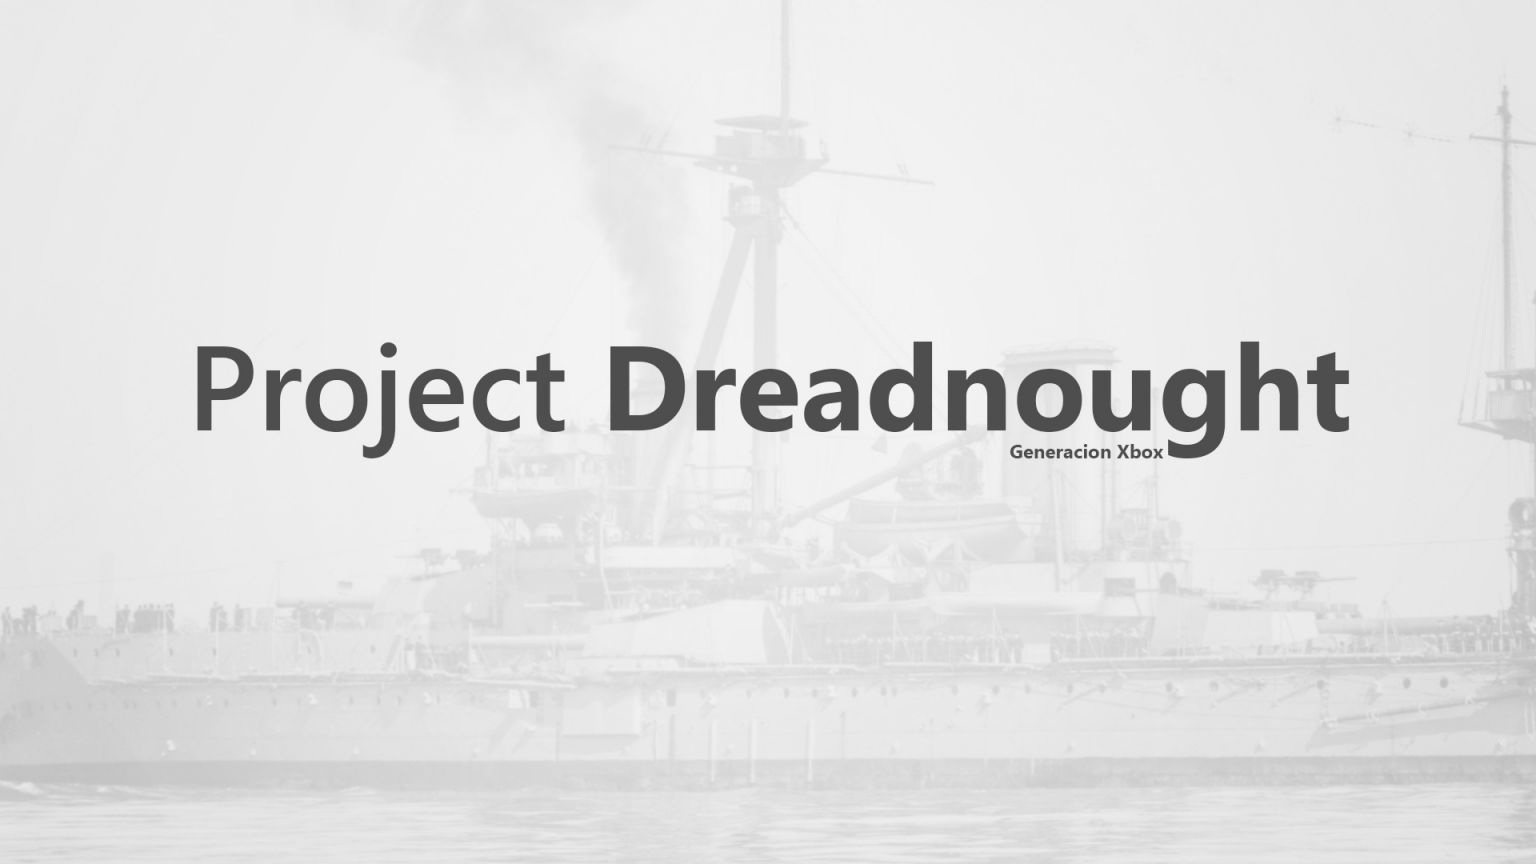 Project Dreadnought